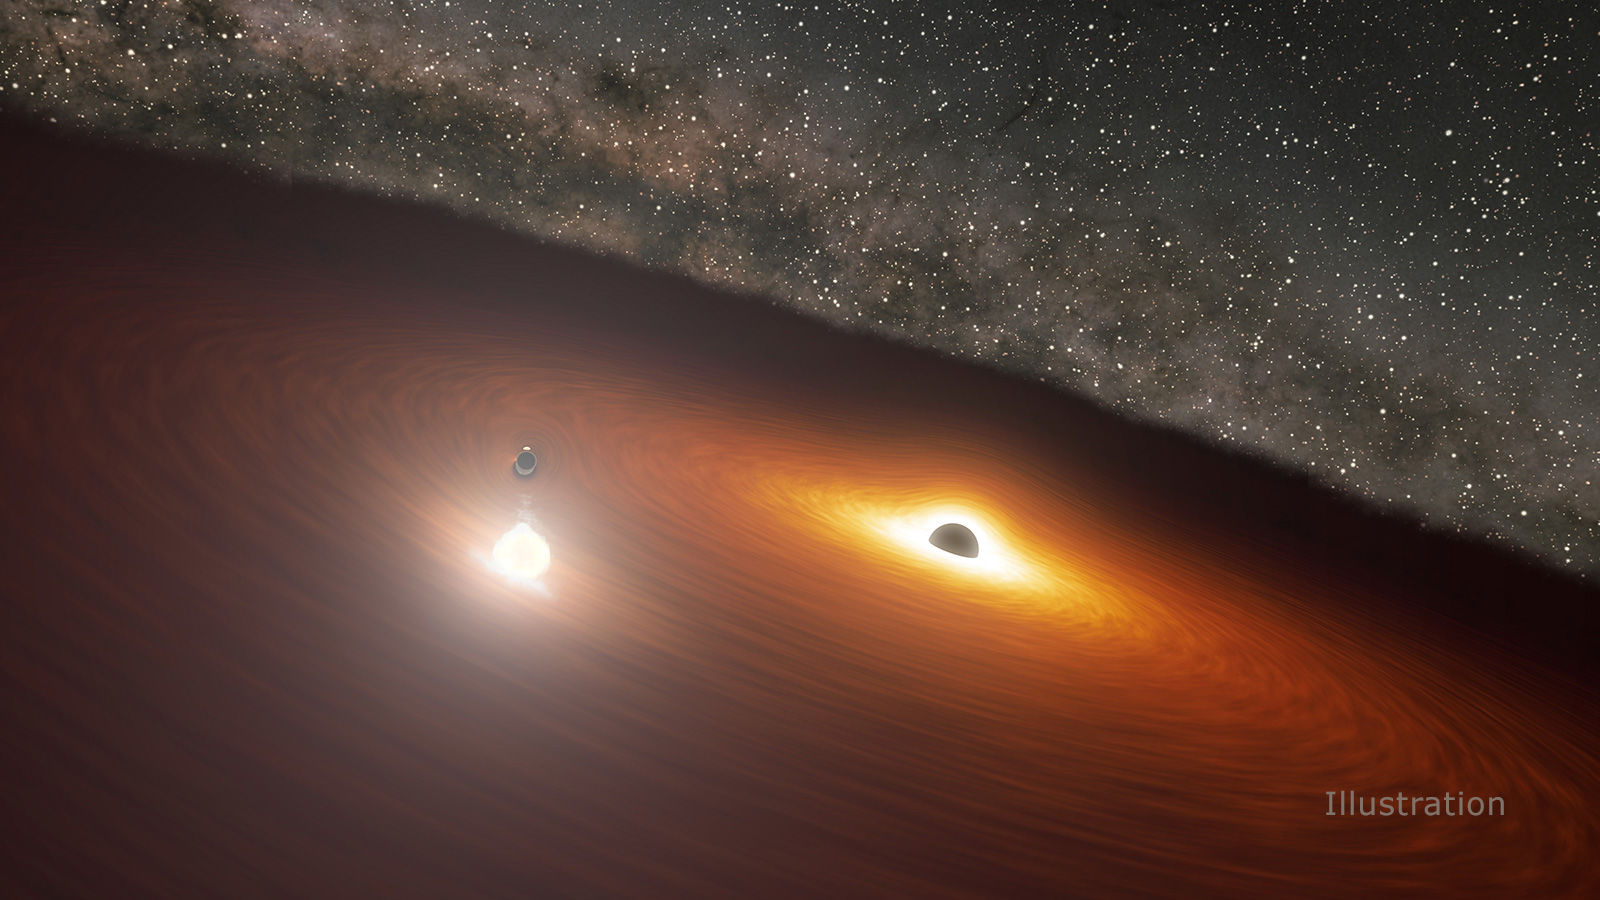 Artwork (not to scale) depicting the binary black hole in the heart of the blazar OJ 287. The less massive black hole plunges through the accretion disk around the more massive black hole, creating a huge bubble of superheated gas. Credit: NASA/JPL-Caltec